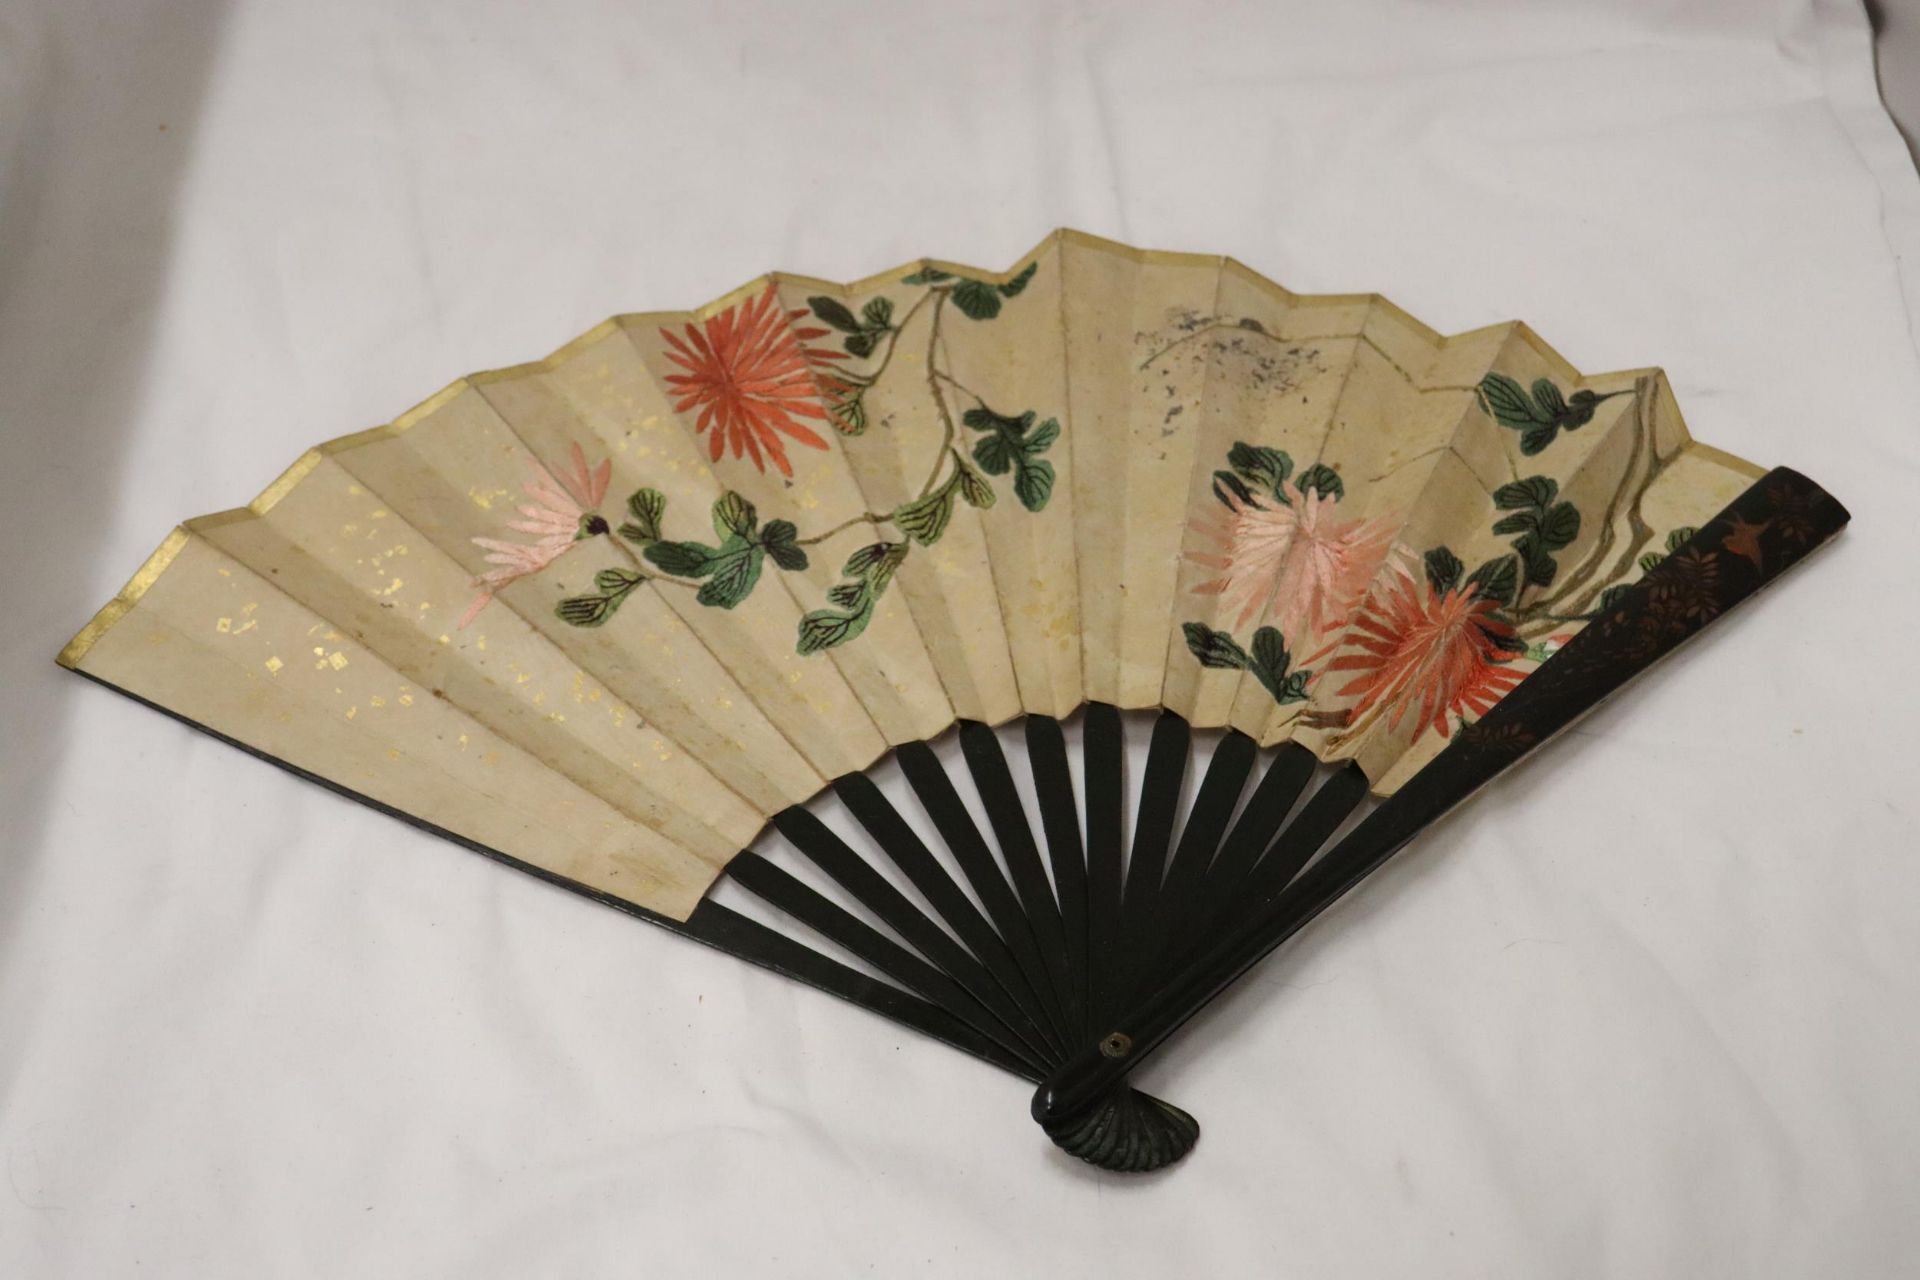 A CHINESE FAN WITH EMBROIDERED FLORAL DECORATION